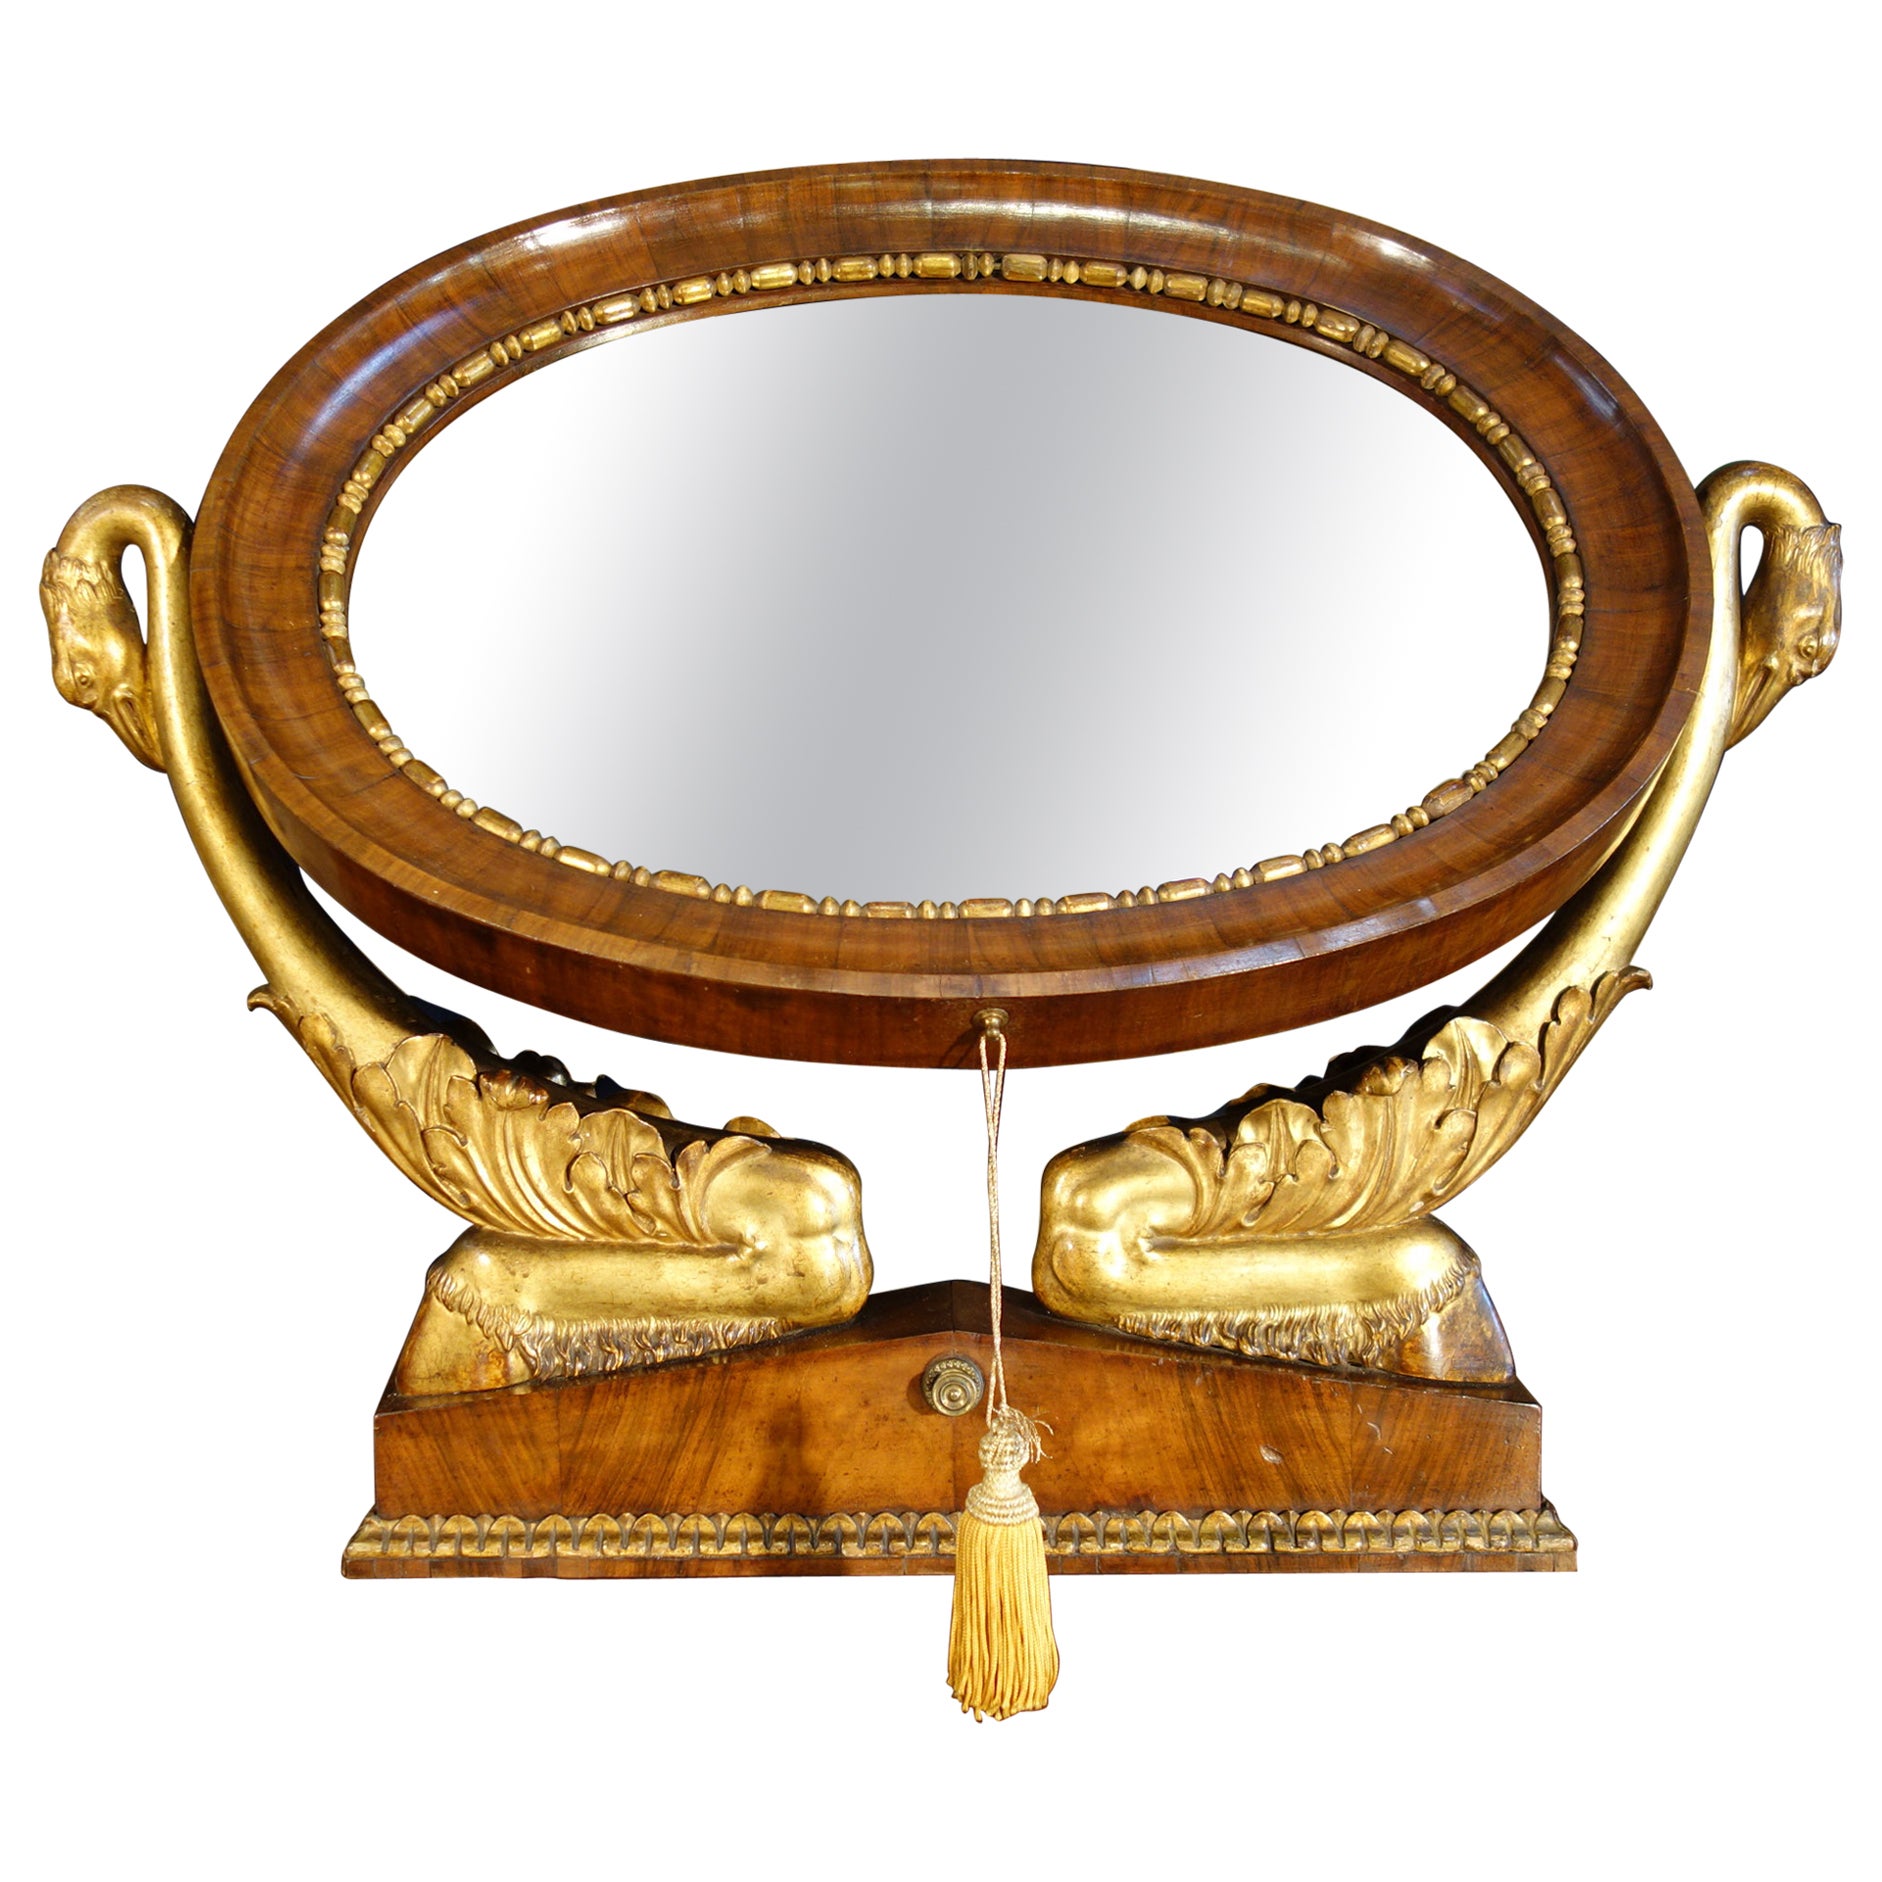 Italian Empire Walnut Psyche Table Mirror with Gold Gilt Swans and Ebony Inlay For Sale